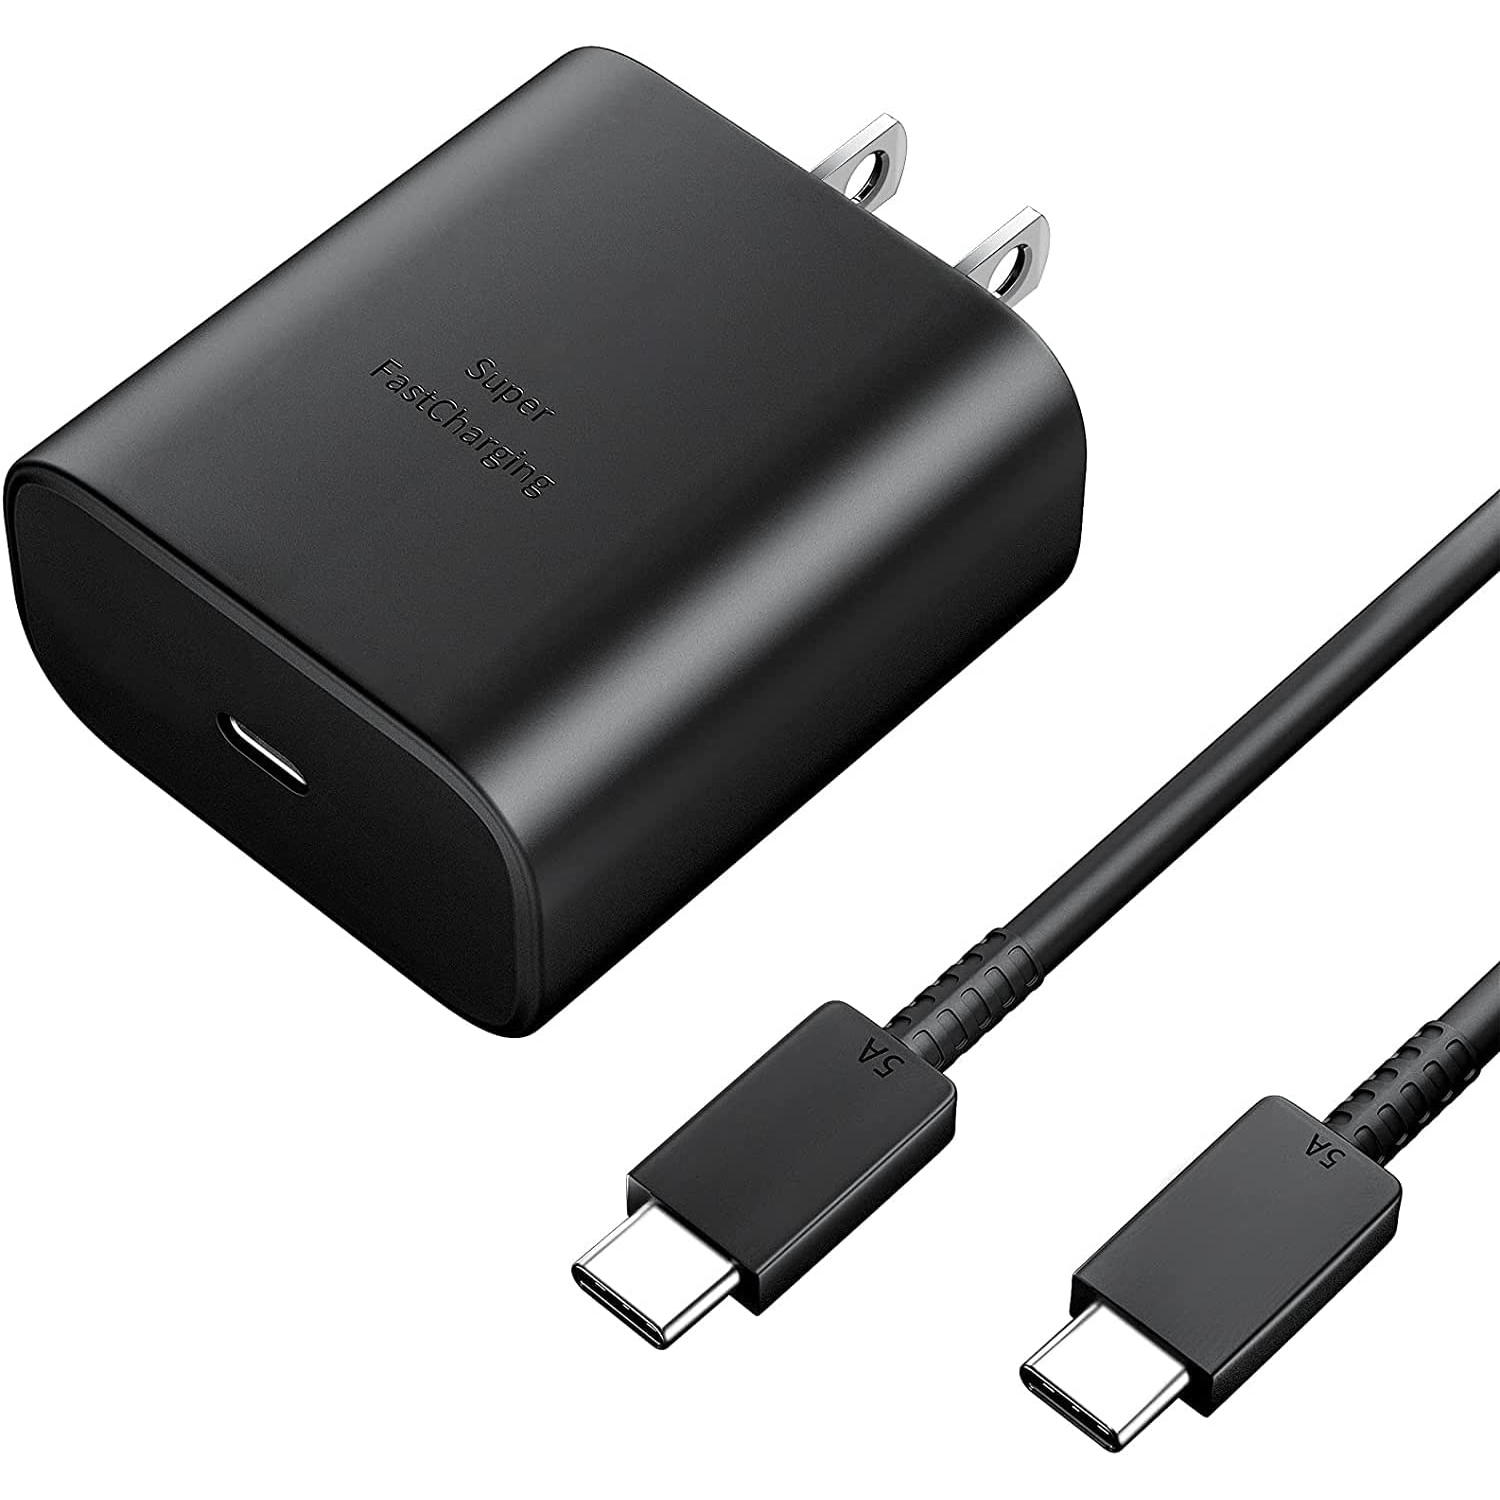 45W USB-C Super Fast Charging Wall Charger| USB C to C charging cable included| for Samsung Galaxy S22 S21 S20 Ultra Plus Note 10+,Google Pixel,Note 20| Universal Compatibility| Combo/Black| GA|